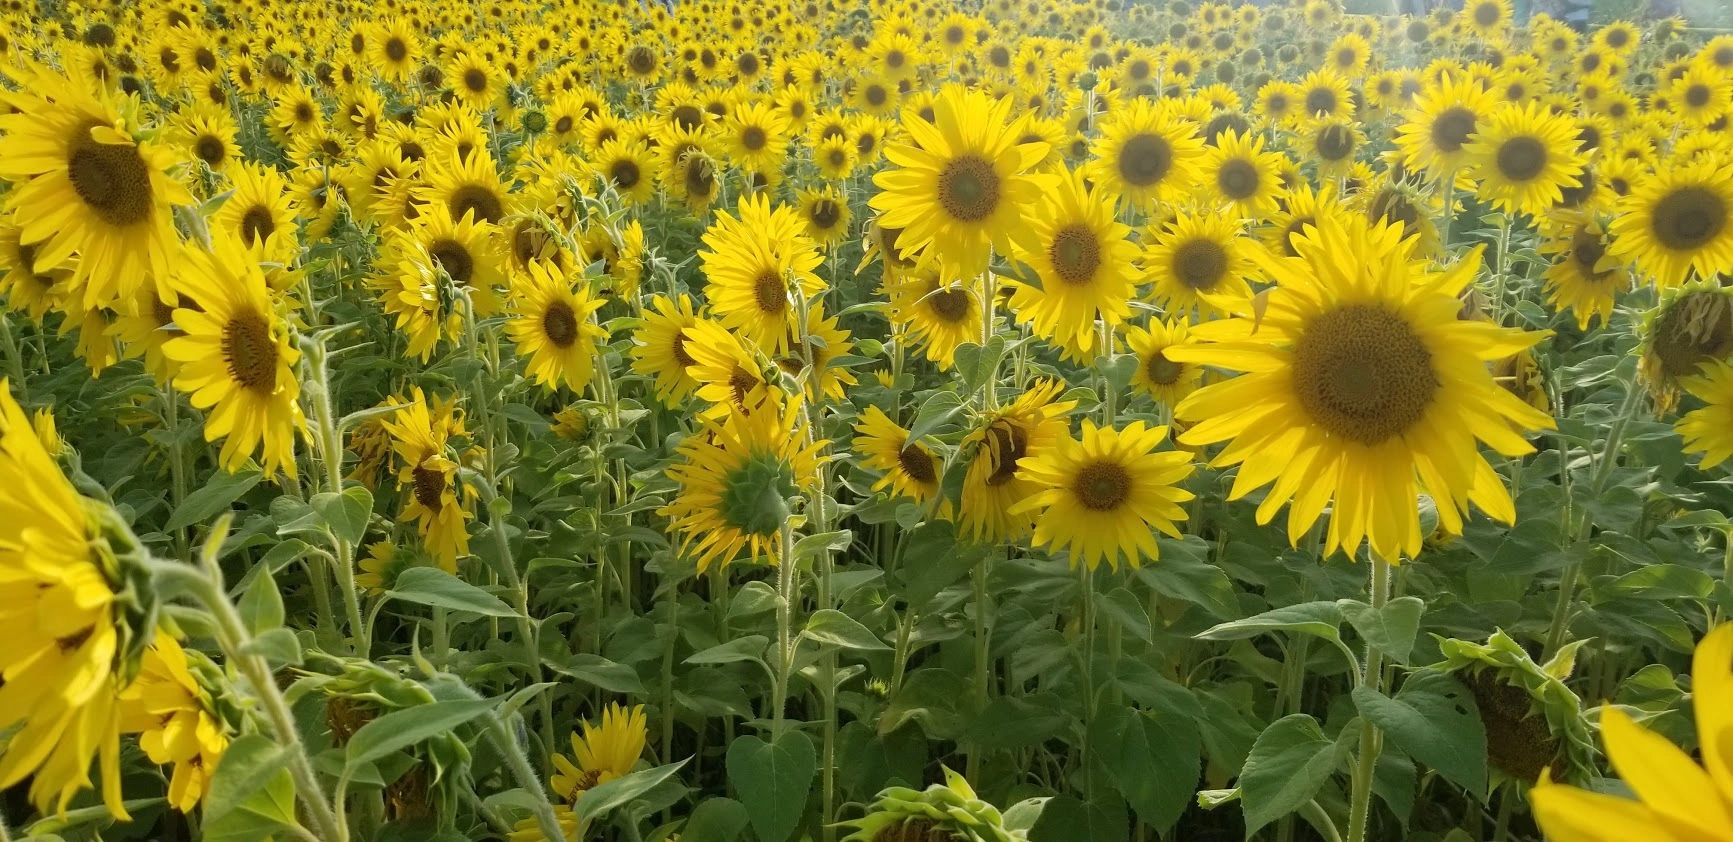 Sunflowers at the Experimental Farm. Photographed by O.E. Fitzgerald 2020.